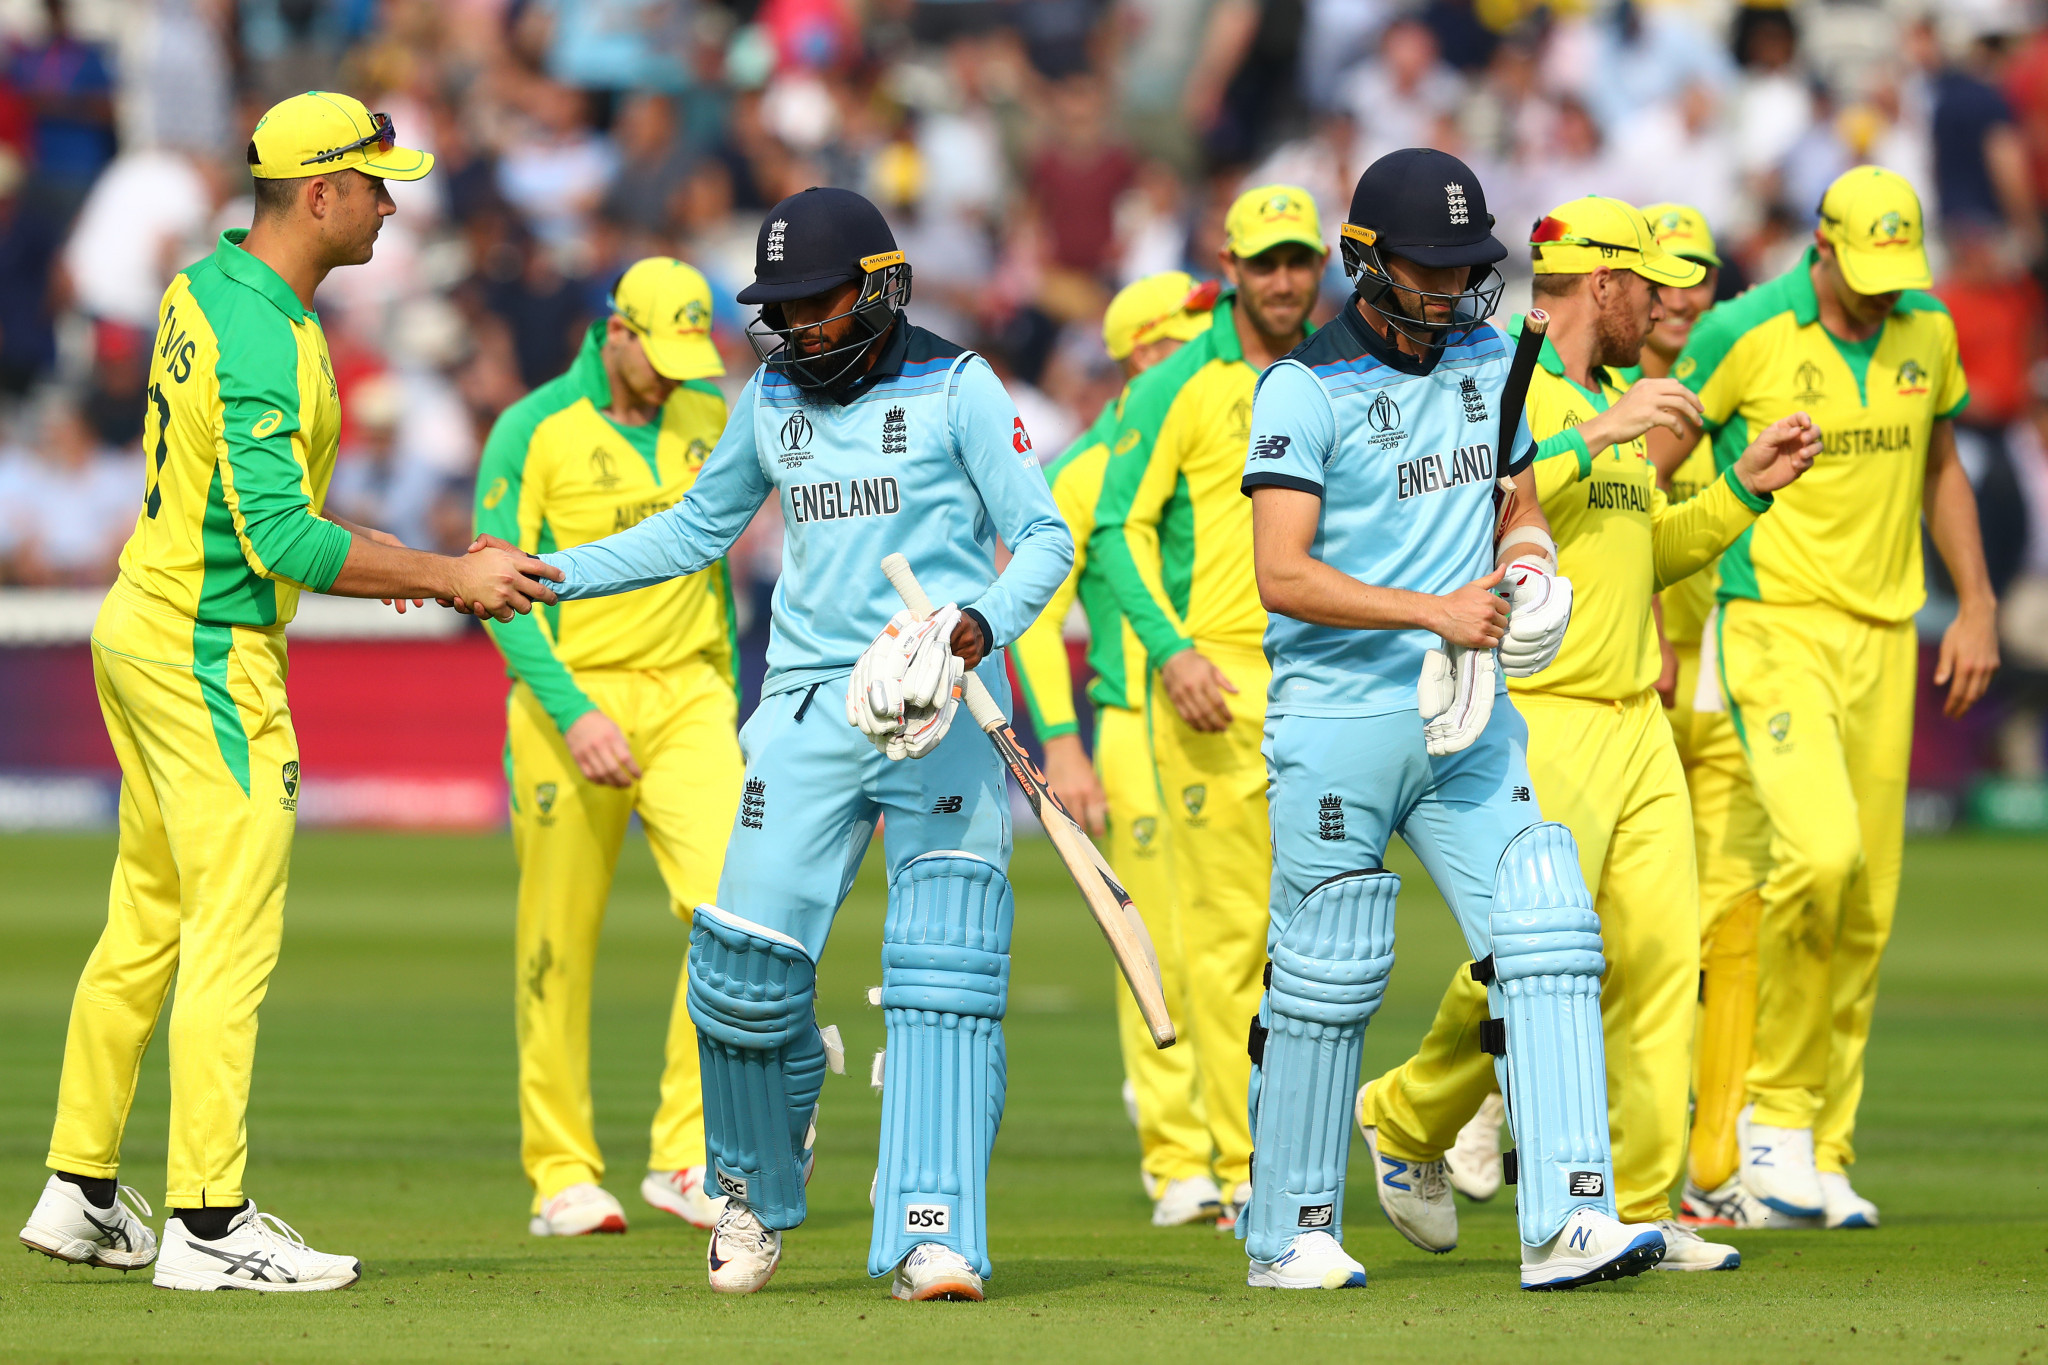 Hosts England's hopes of reaching the semi-finals of the ICC Men’s World Cup were dealt a serious blow after they suffered a crushing defeat against Australia at Lord's today ©Getty Images